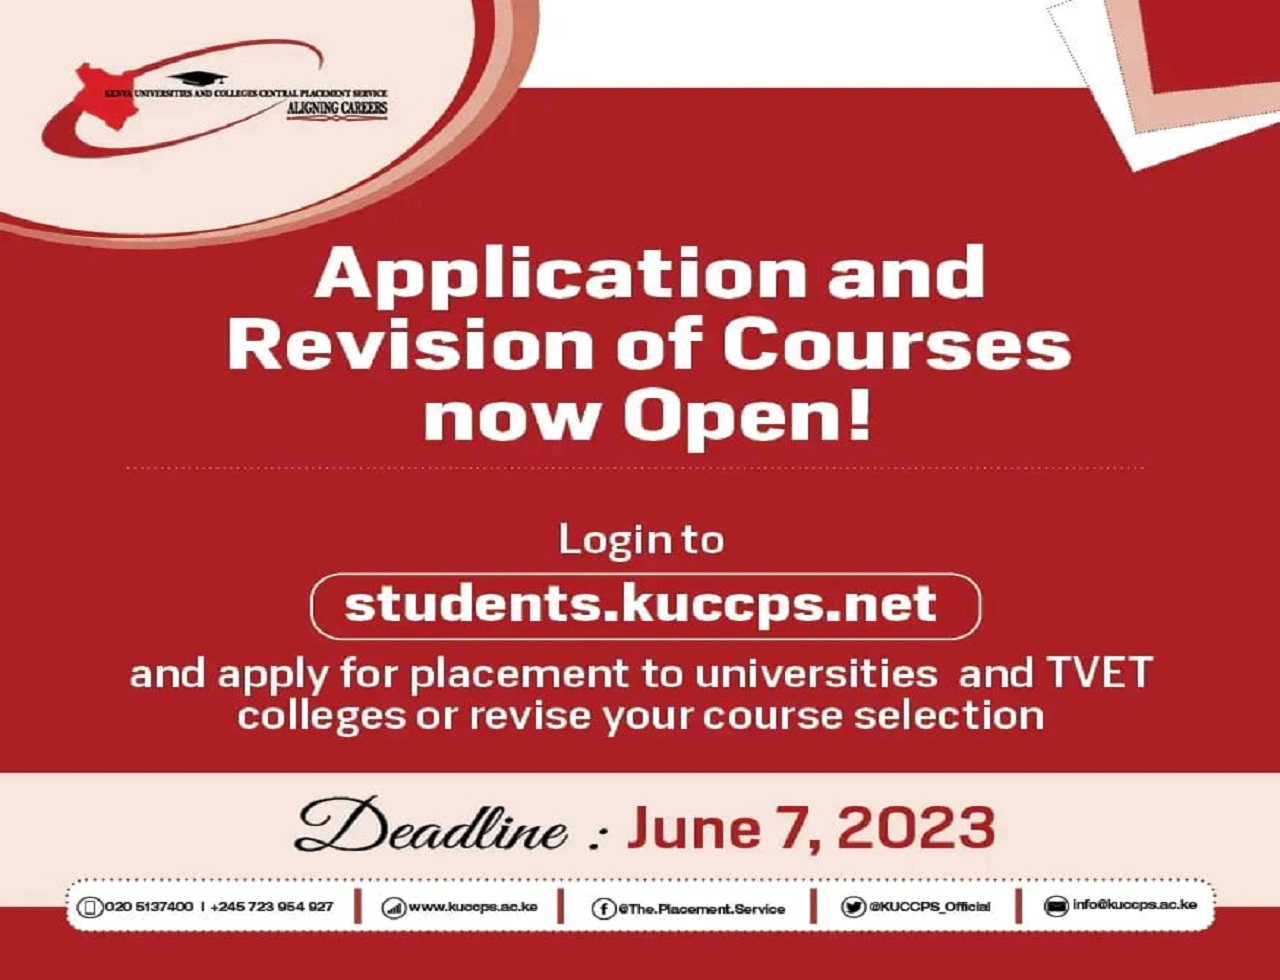 Application and Revision of Courses now open 